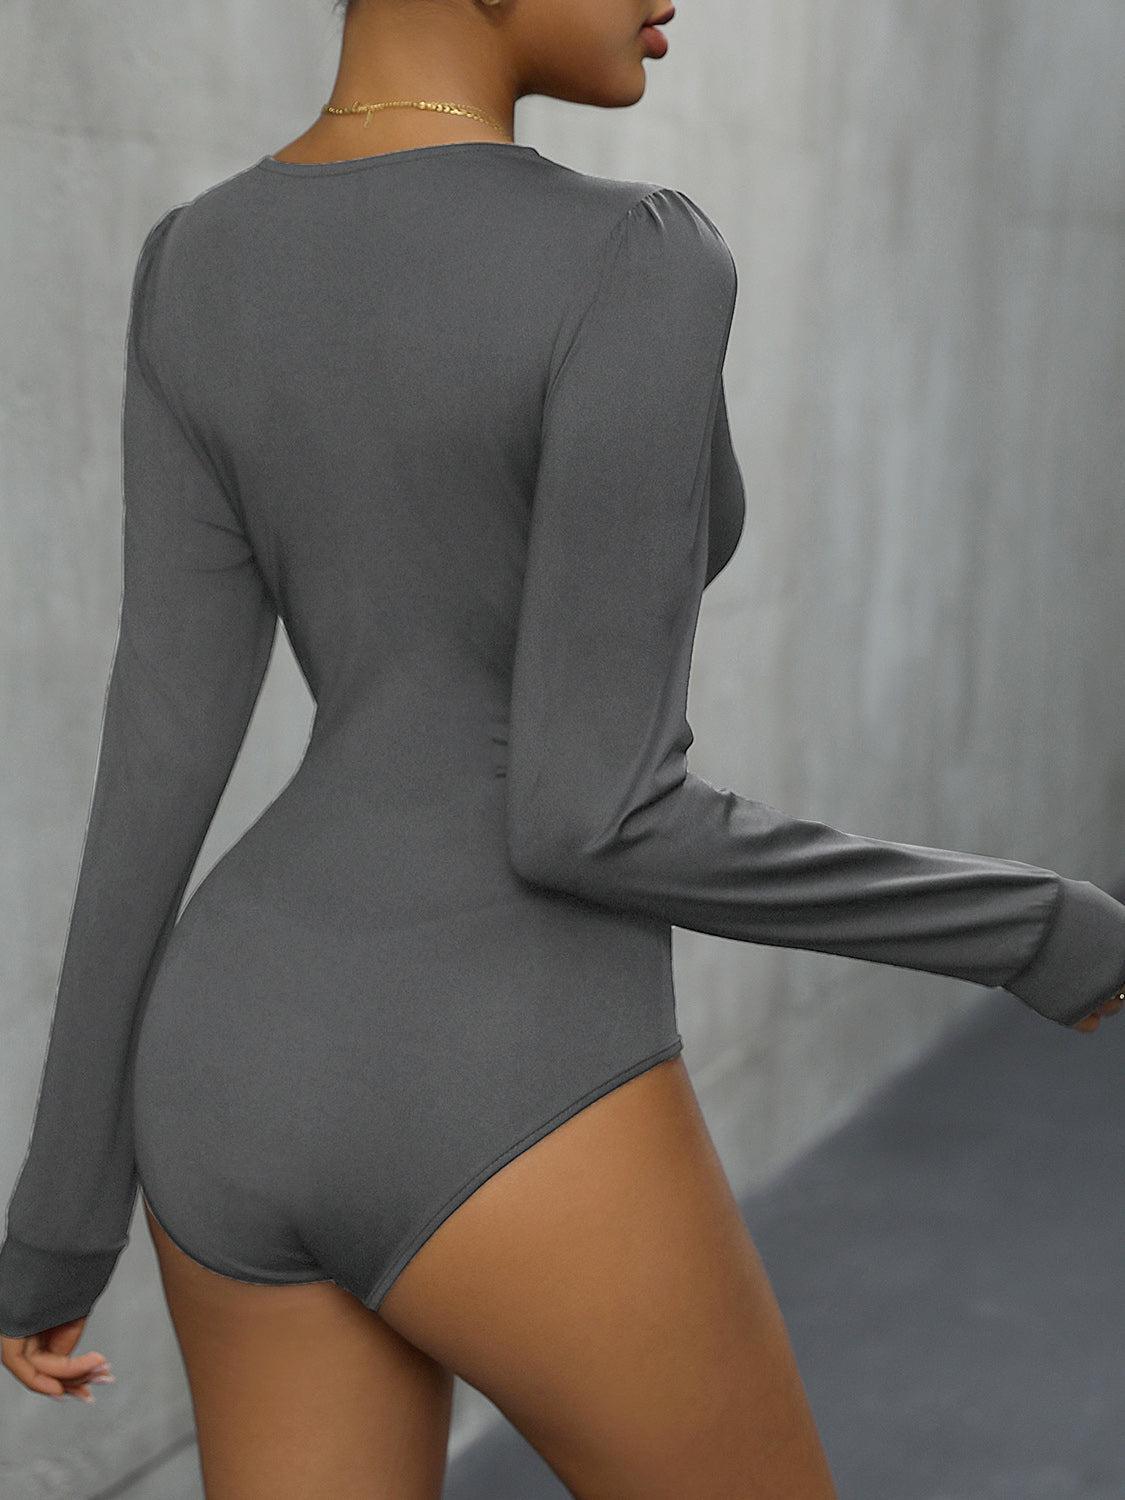 a woman in a gray bodysuit is posing for the camera